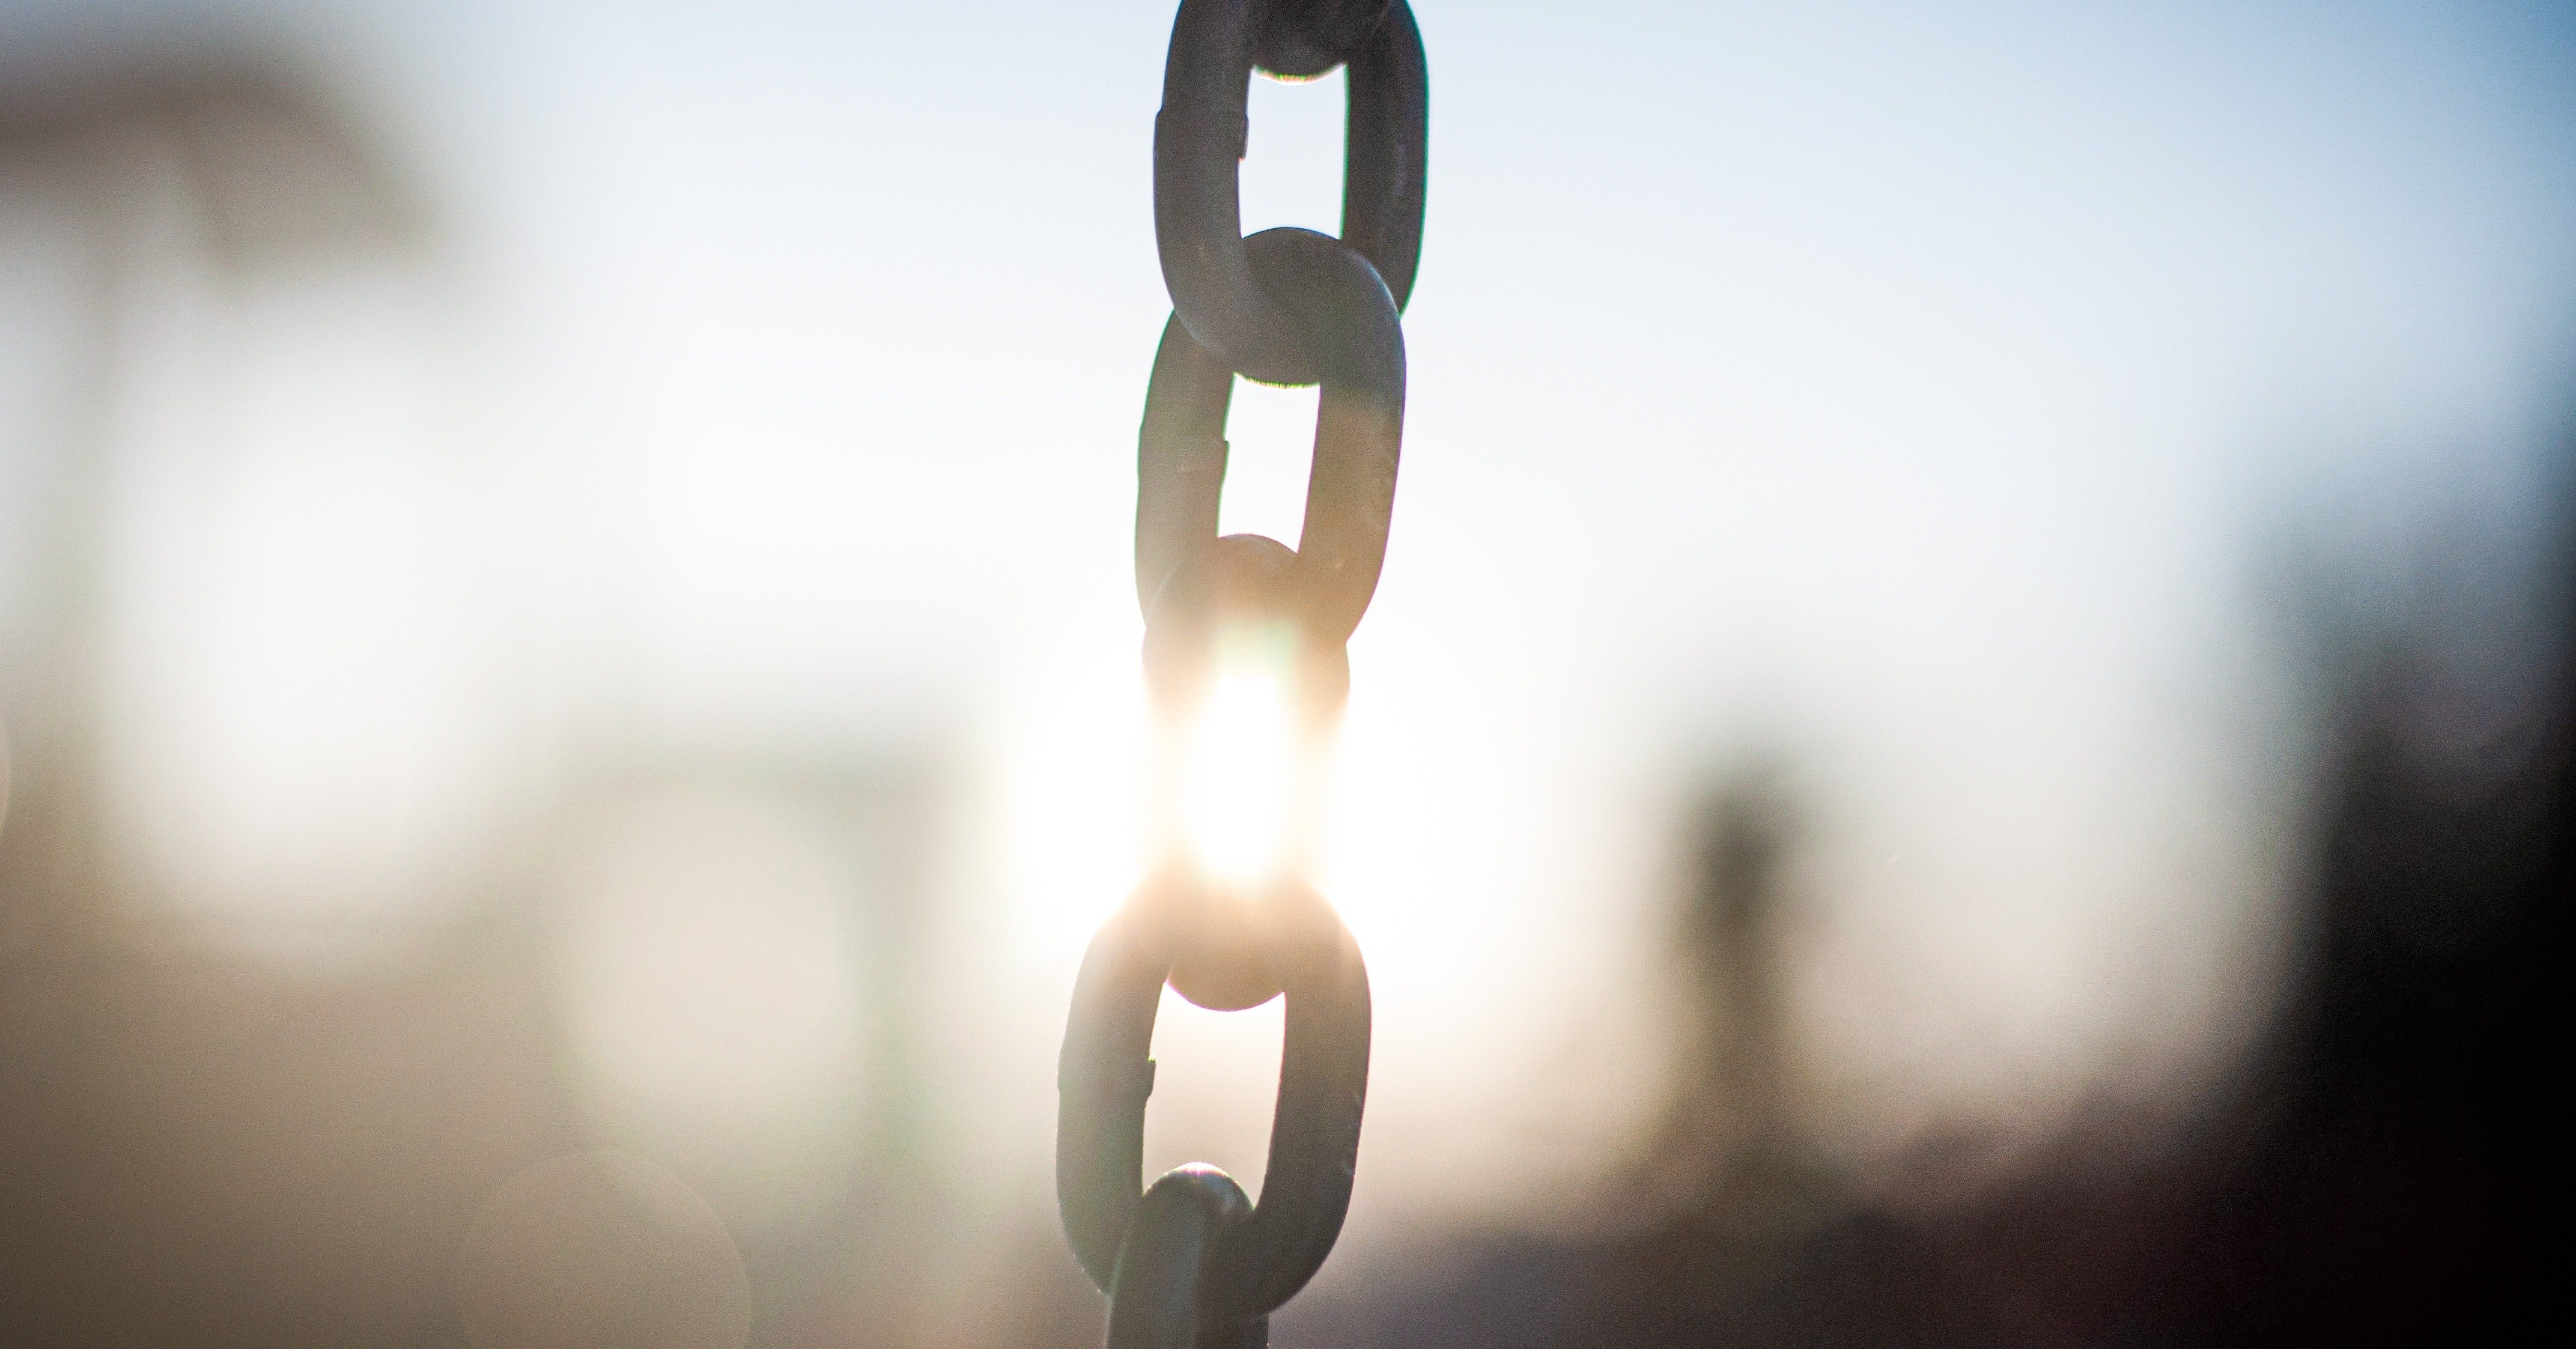 Metal chain in the sunlight